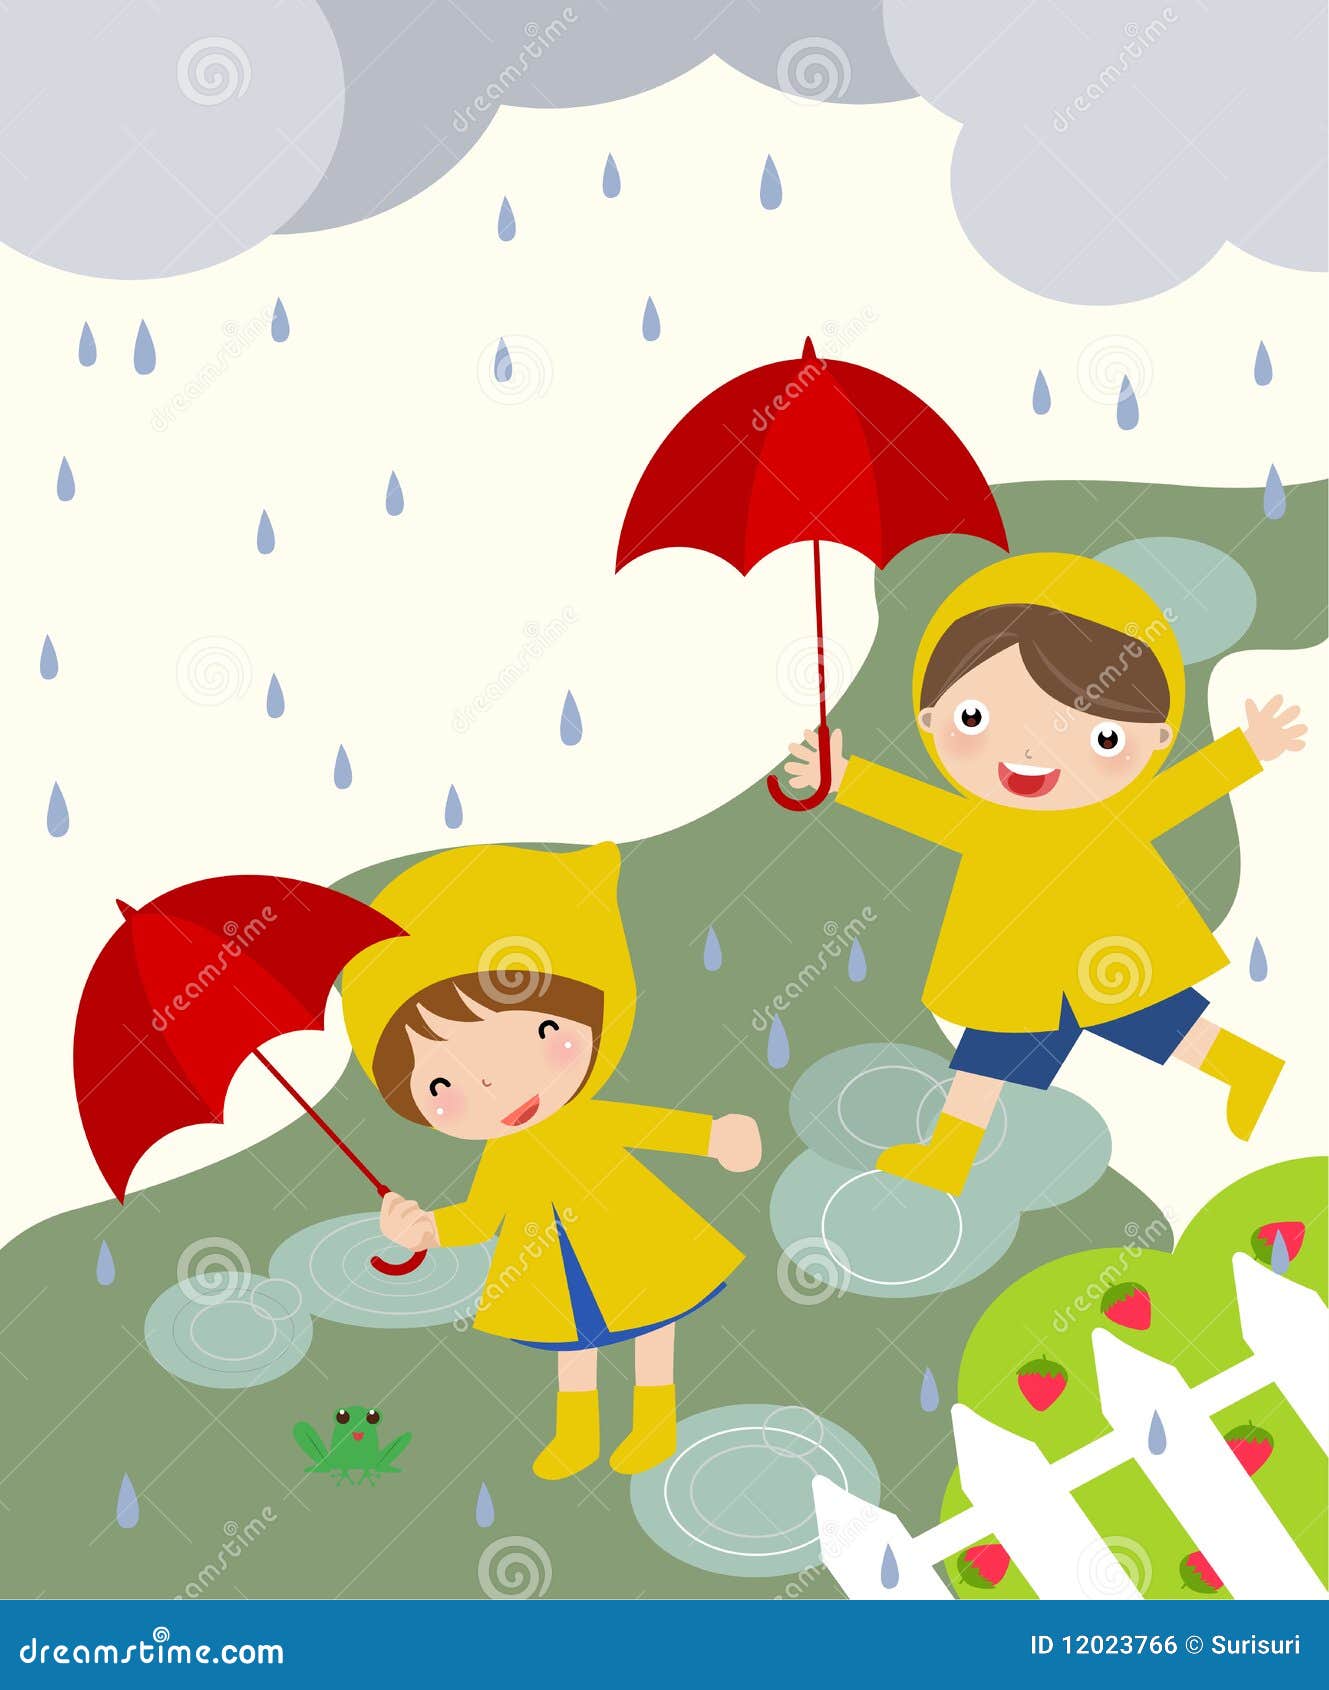 Cute Kids Playing In The Rain Royalty Free Stock Image